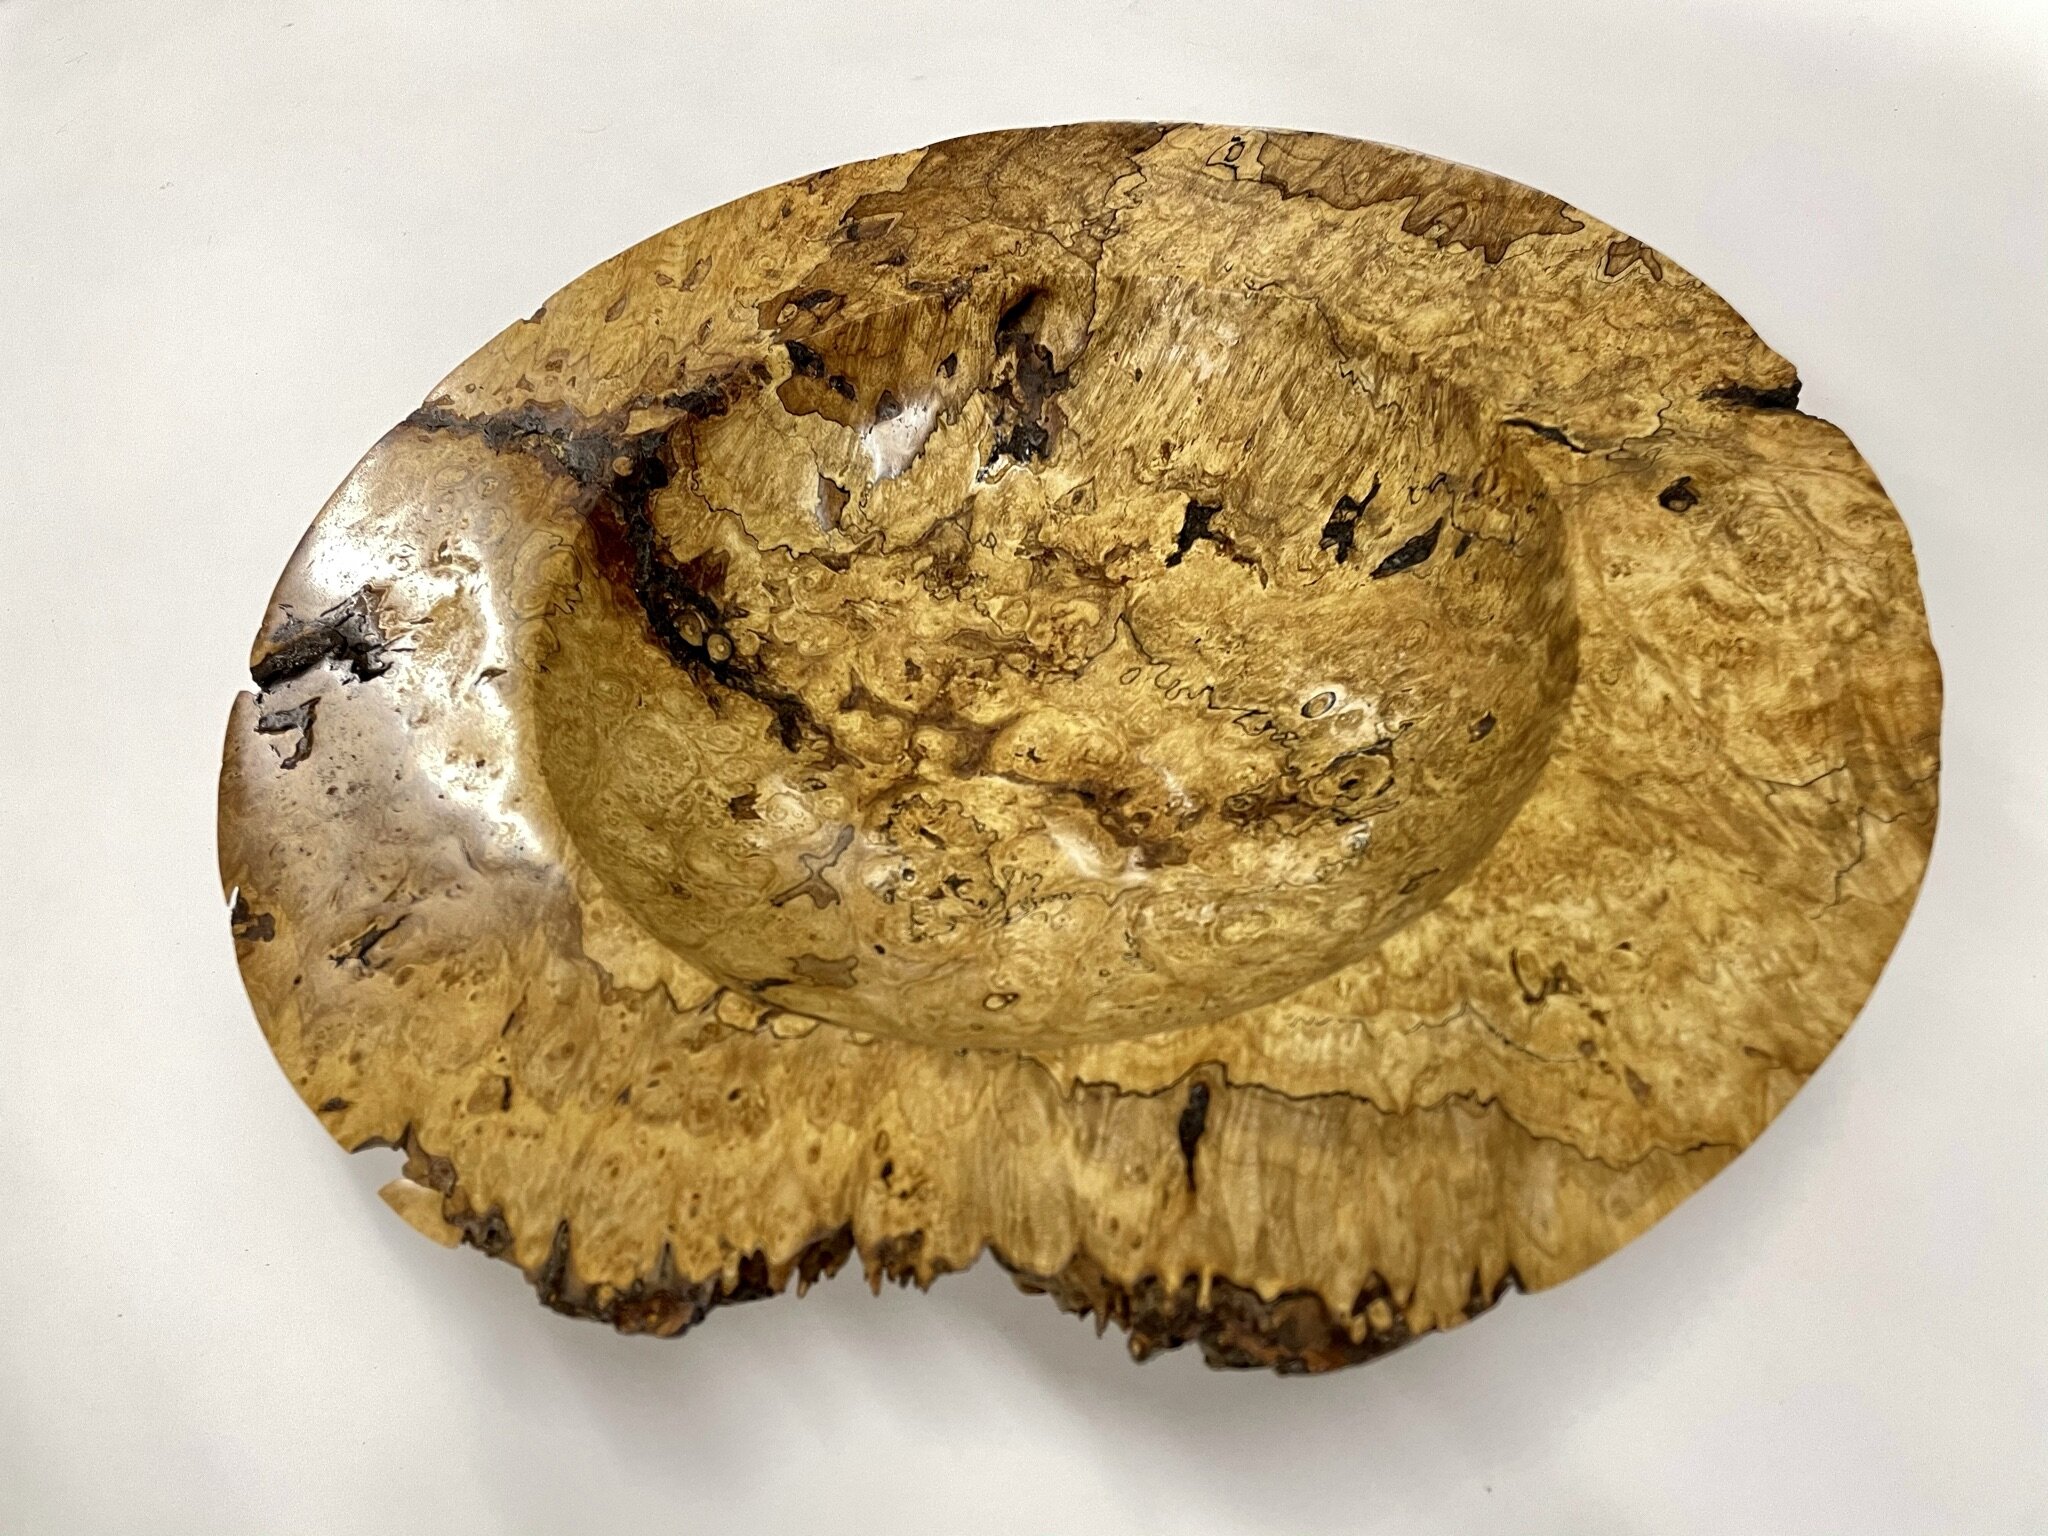  The rugged textures and the rustic beauty of bark inclusions are highlighted in this platter.   Big Leaf Maple Burl Platter  14.5” x 3” high $500 